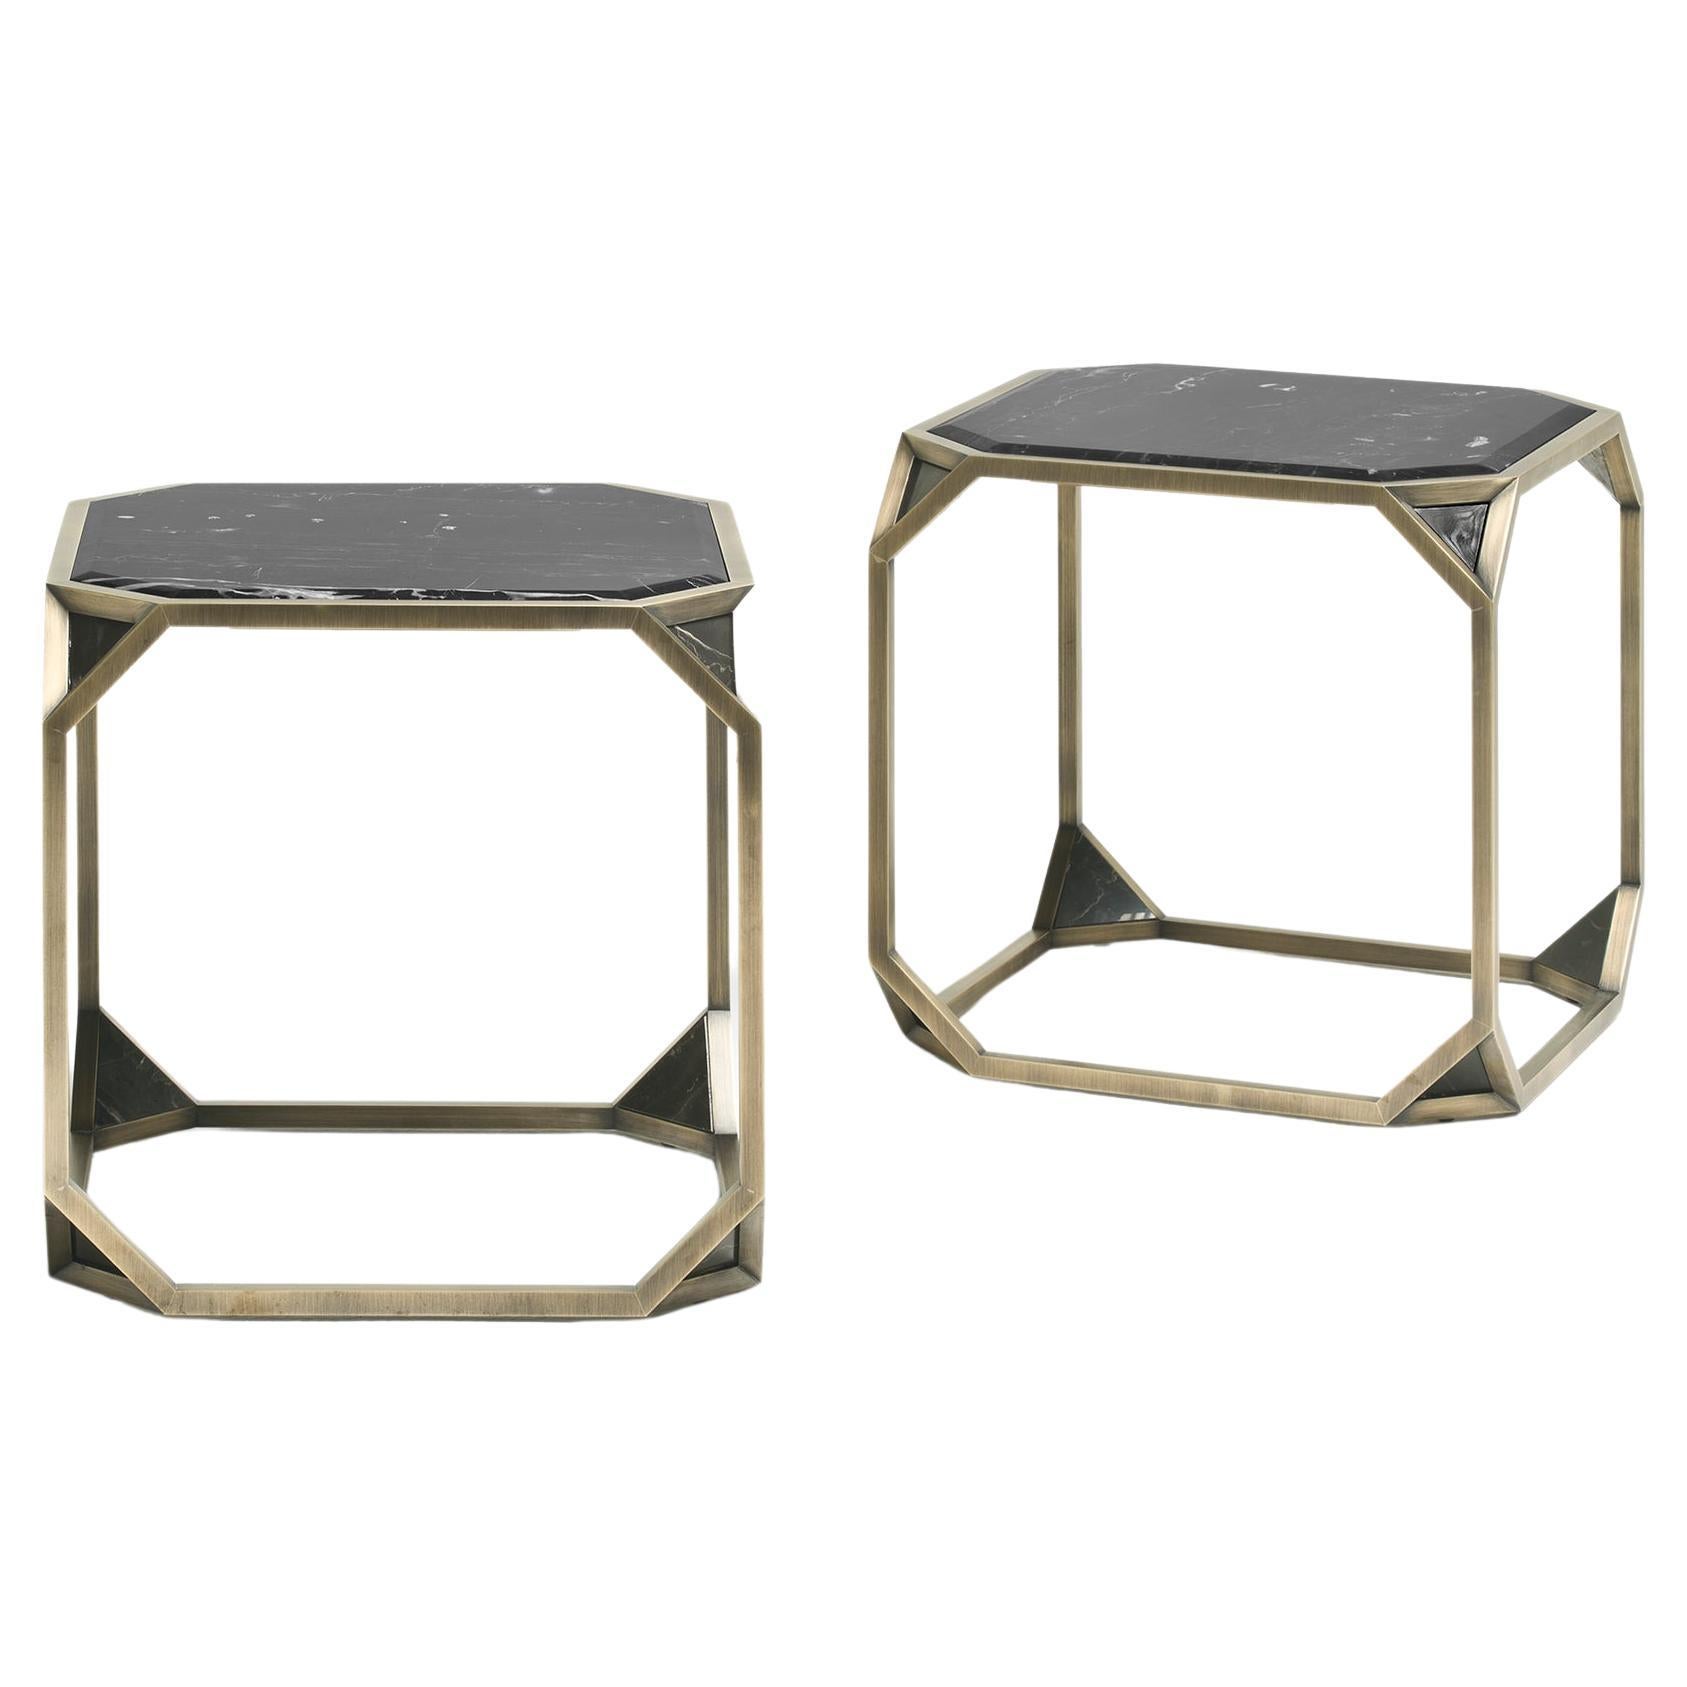 PARES Bedside Table in Bronzed Brass and Black Marble designed by ARXX Studio For Sale